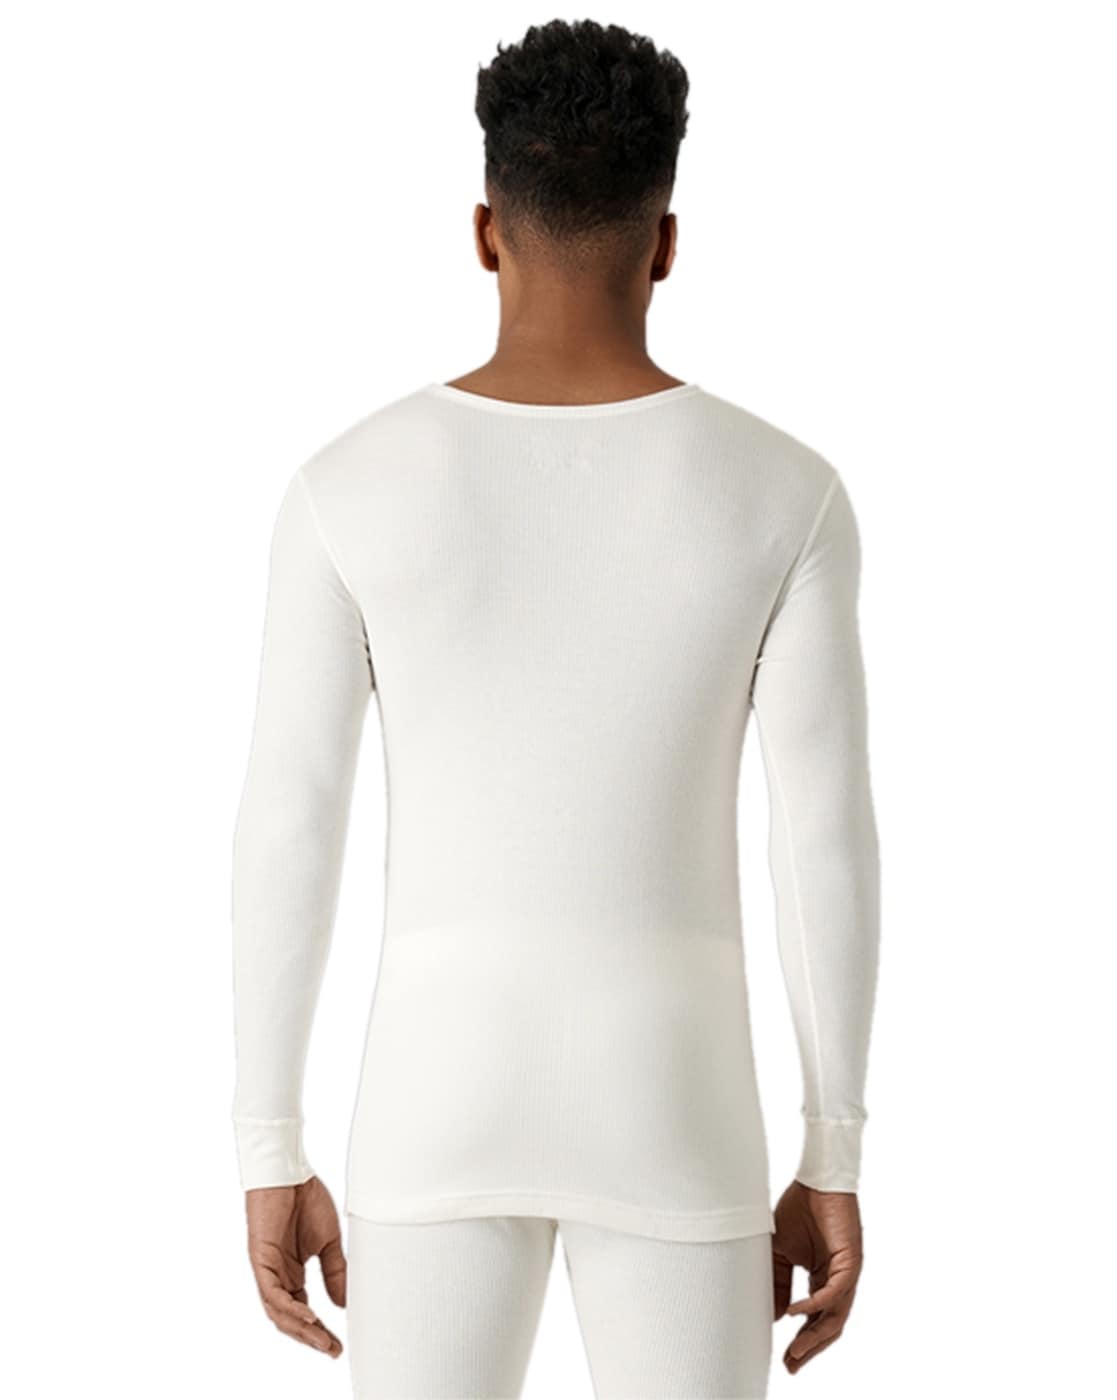 Jockey Men's 2401 Super Combed Cotton Rich Full Sleeve Regular Fit Long  Sleeve Thermal Long Sleeve Undershirt with Stay Warm Technology